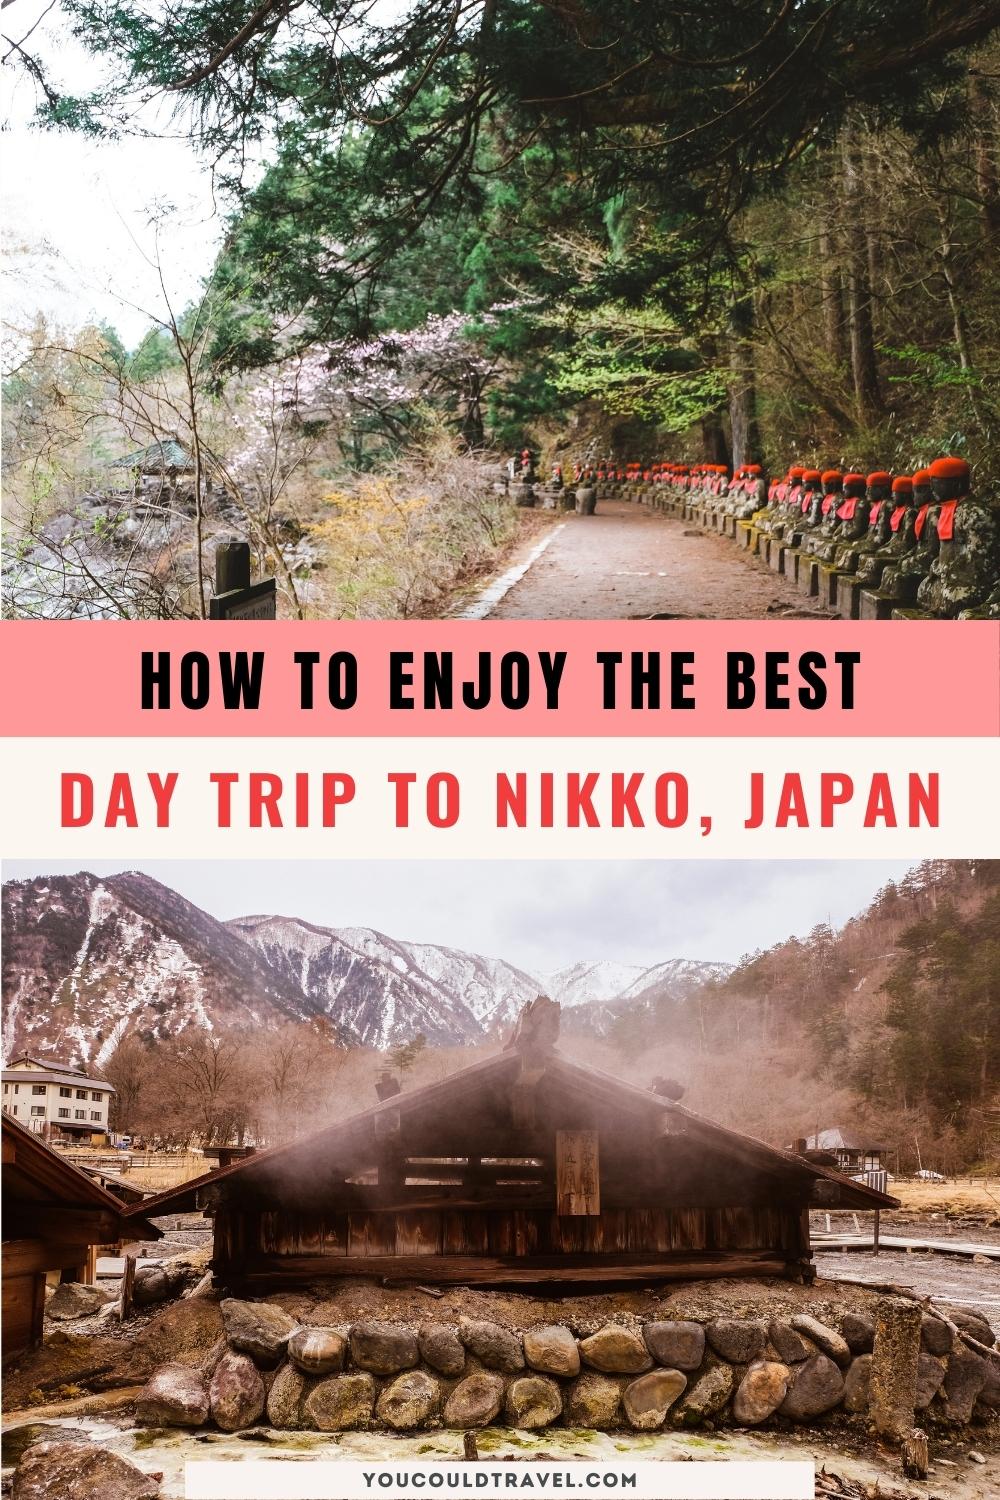 The most efficient day trip to Nikko from Tokyo